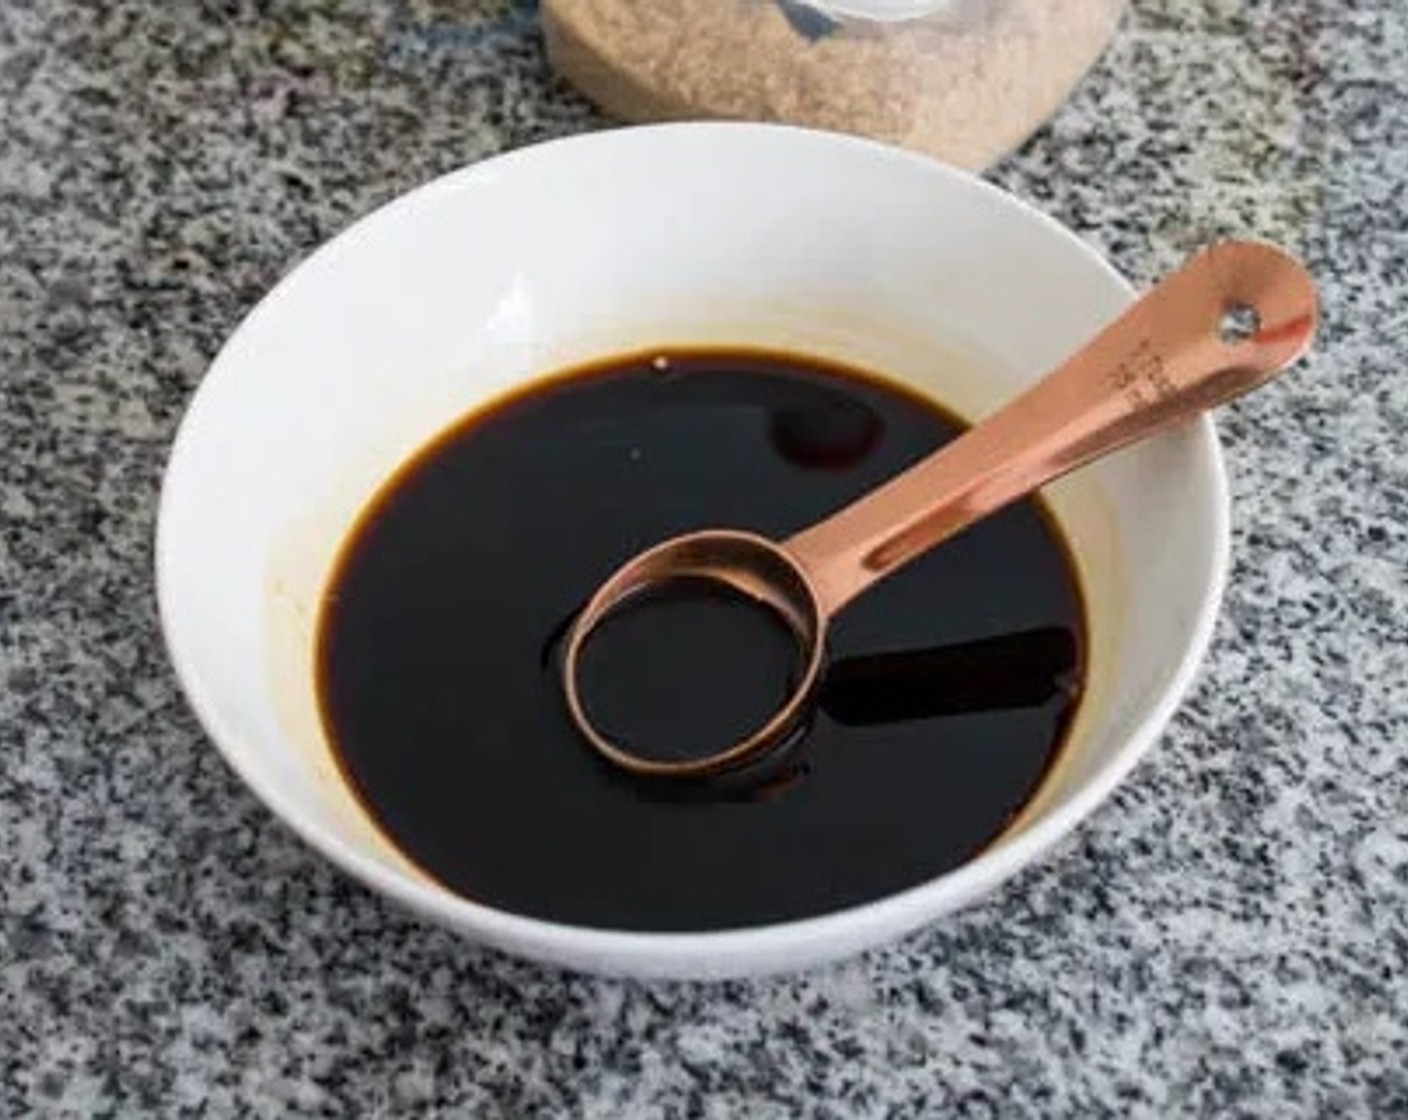 step 4 Prepare the sauce by combining in a small bowl Oyster Sauce (2 Tbsp), Water (2 Tbsp), Light Soy Sauce (1 Tbsp), Rice Vinegar (1 Tbsp), Dark Soy Sauce (1 tsp), and Brown Sugar (2 Tbsp).